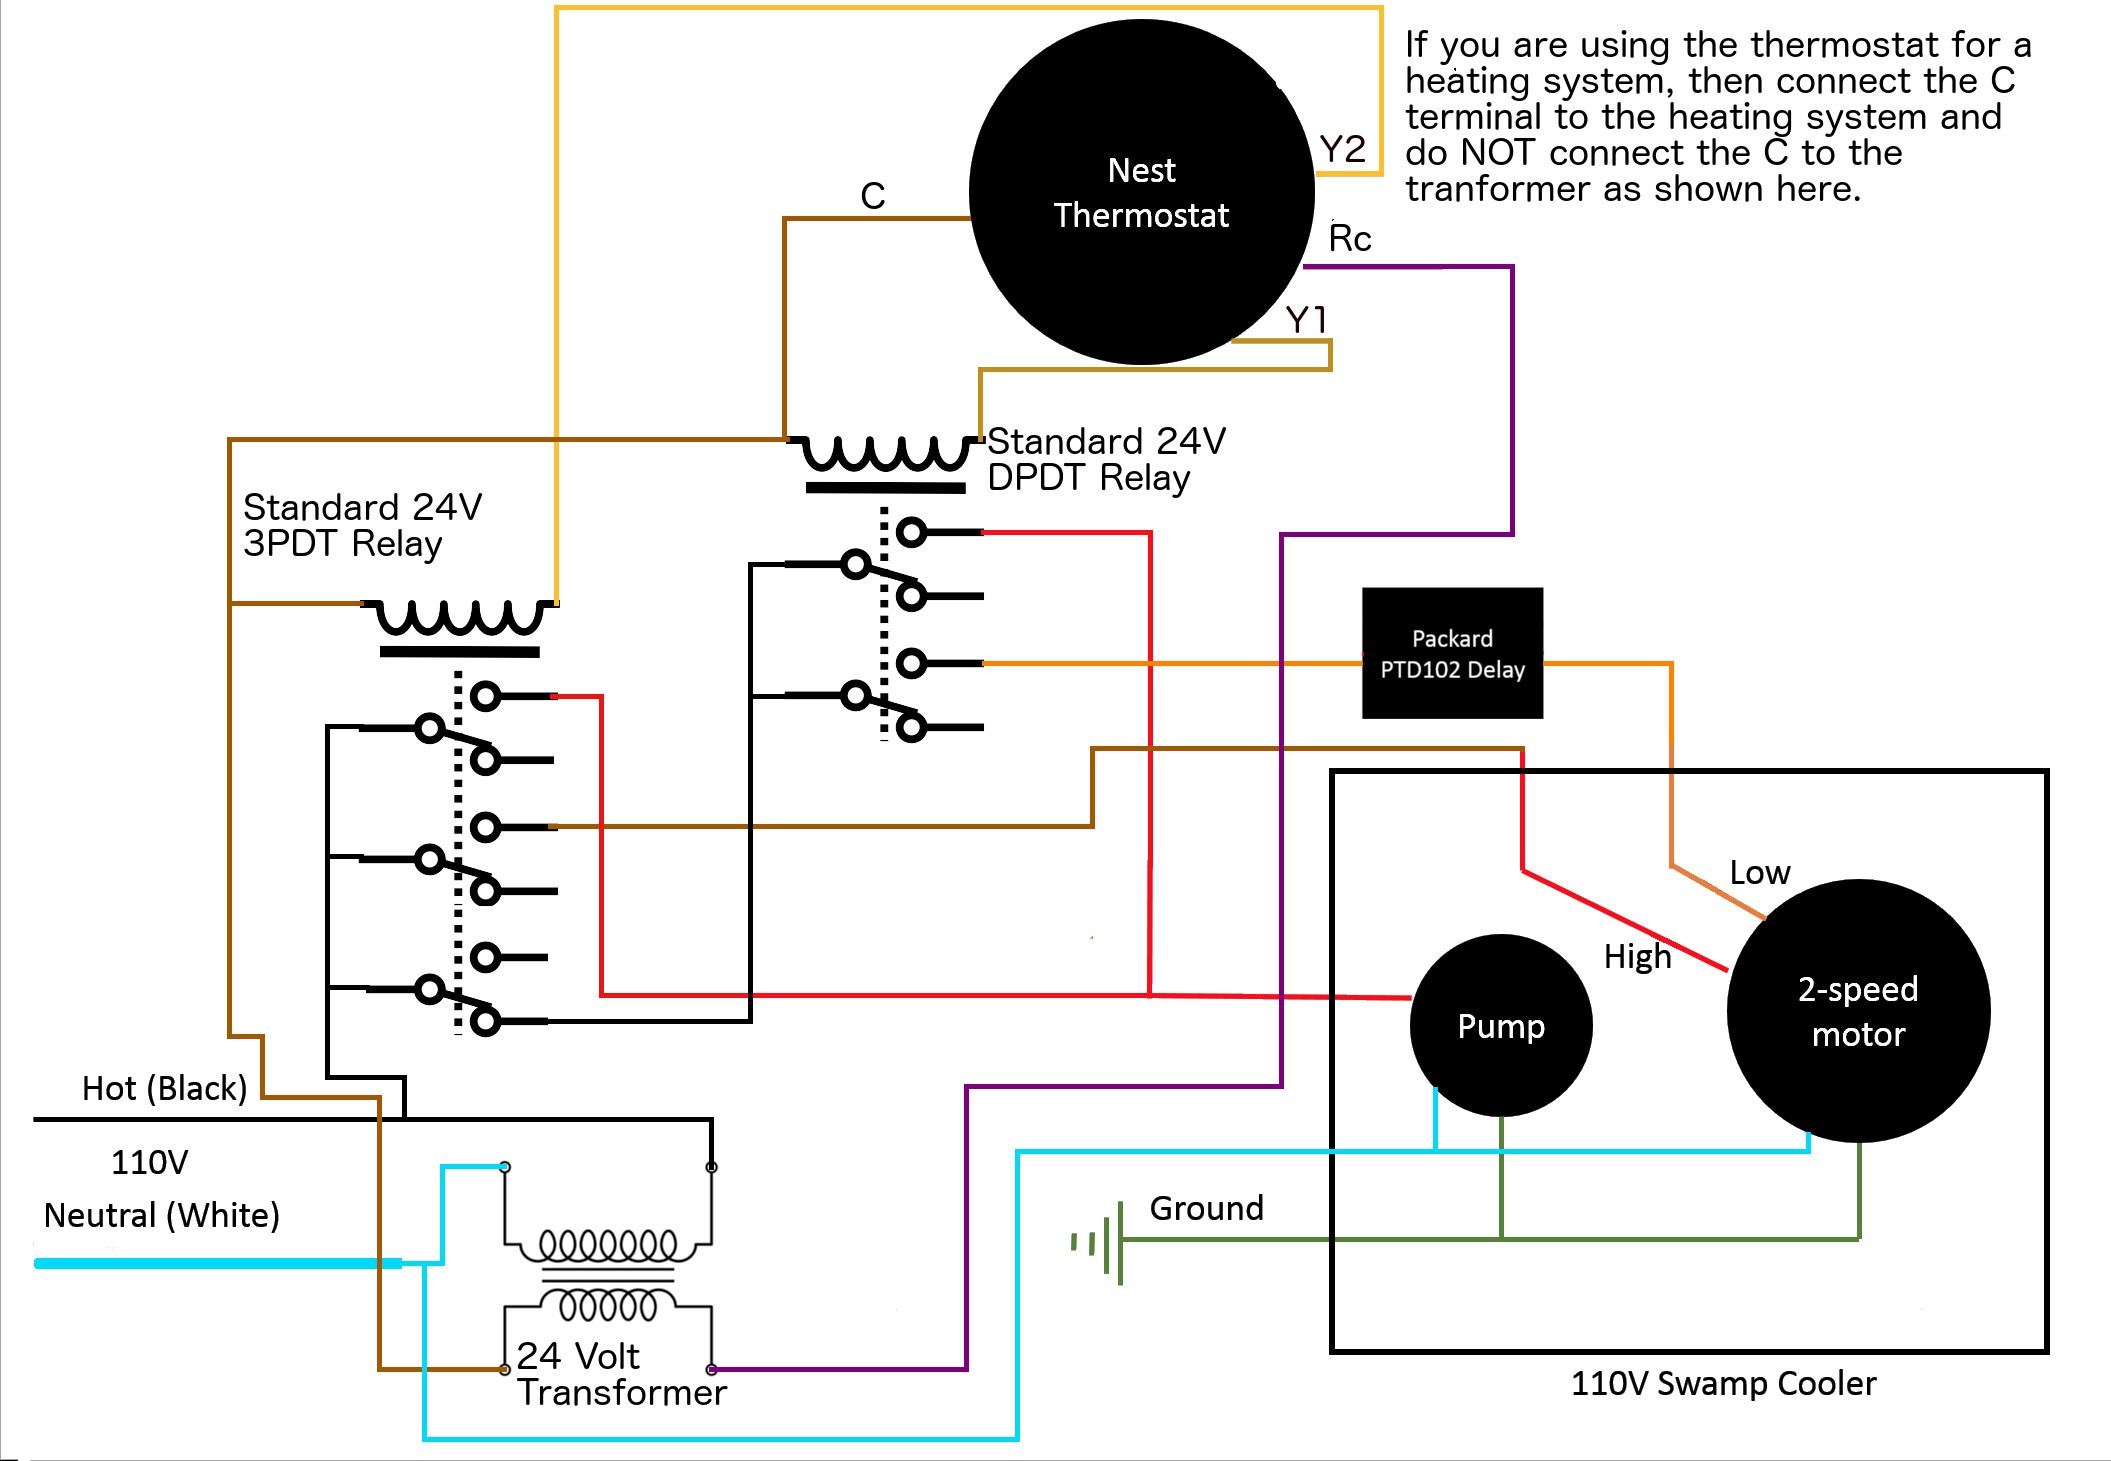 Wiring Controlling 110v Swamp Cooler Using Nest Thermostat Fair Diagram